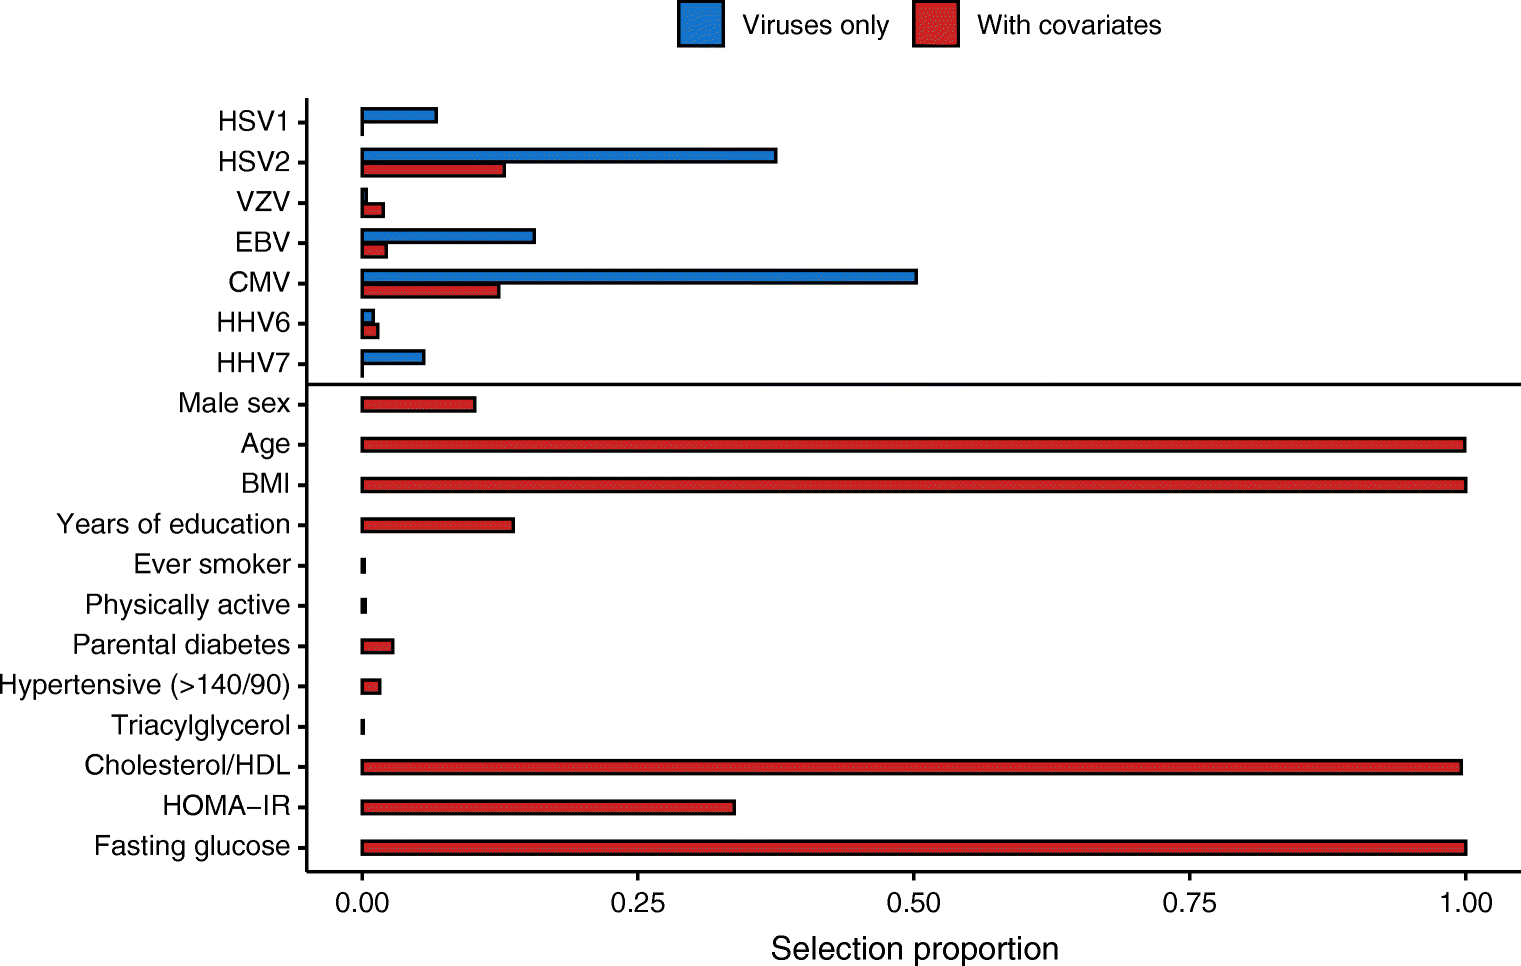 Selection proportion of viruses and confounders in two logistic LASSO models on (pre)diabetes incidence (n = 1257 participants). The first model (blue) only includes the serostatus for the seven assayed herpesviruses, and the second model (red) further includes confounders. We report the selection proportion calculated over 1000 calibrated models fitted on 80% of the full population, each including the same proportion of incident cases. For each model, the penalty was calibrated using fivefold cross-validation. The selection proportion of each variable was derived by summing the number of times it was included across the 1000 models β (95% CI)